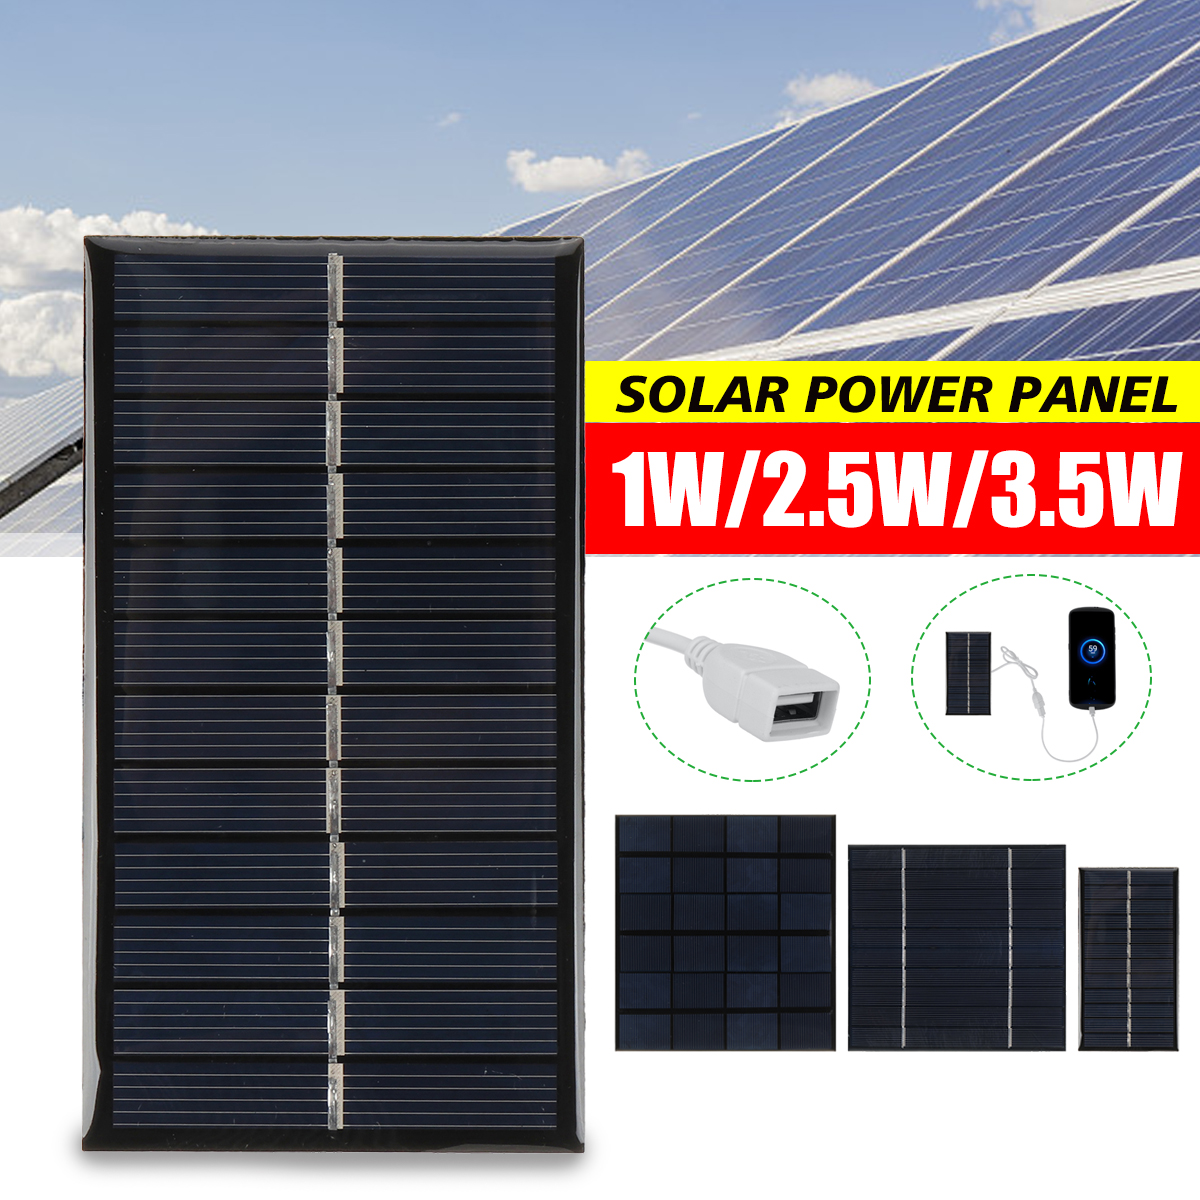 Portable-Solar-Power-Panel-1W-25W-35W-6V-USB-For-Battery-Cell-Phone-Charger-1932072-2